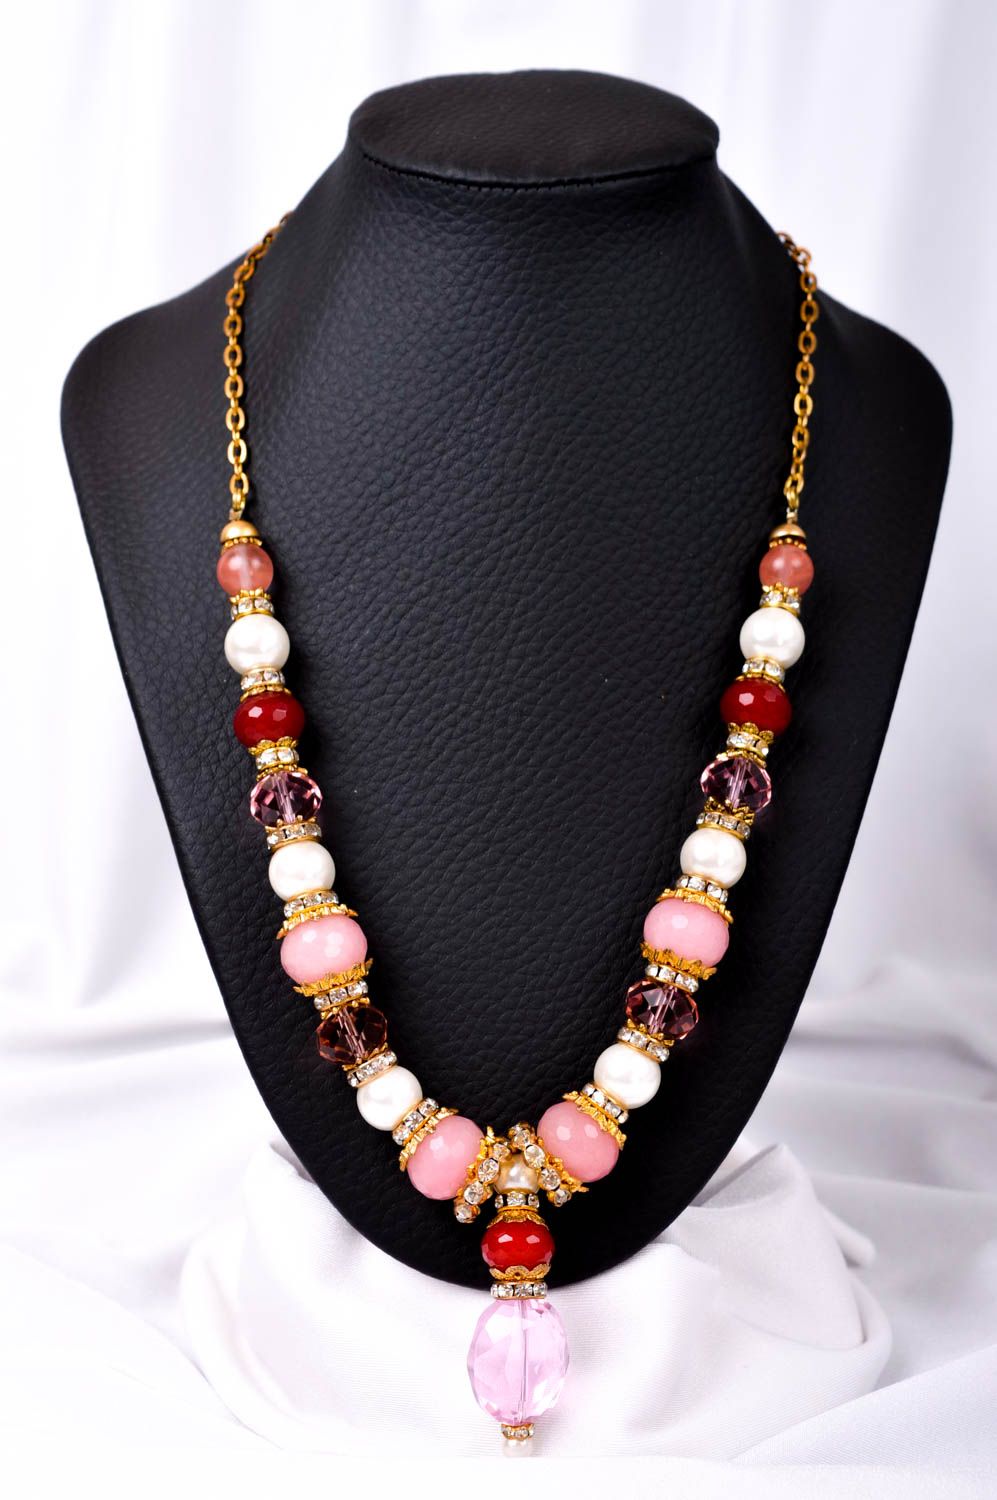 Handmade necklace designer necklace unusual accessory with stones gift ideas photo 1